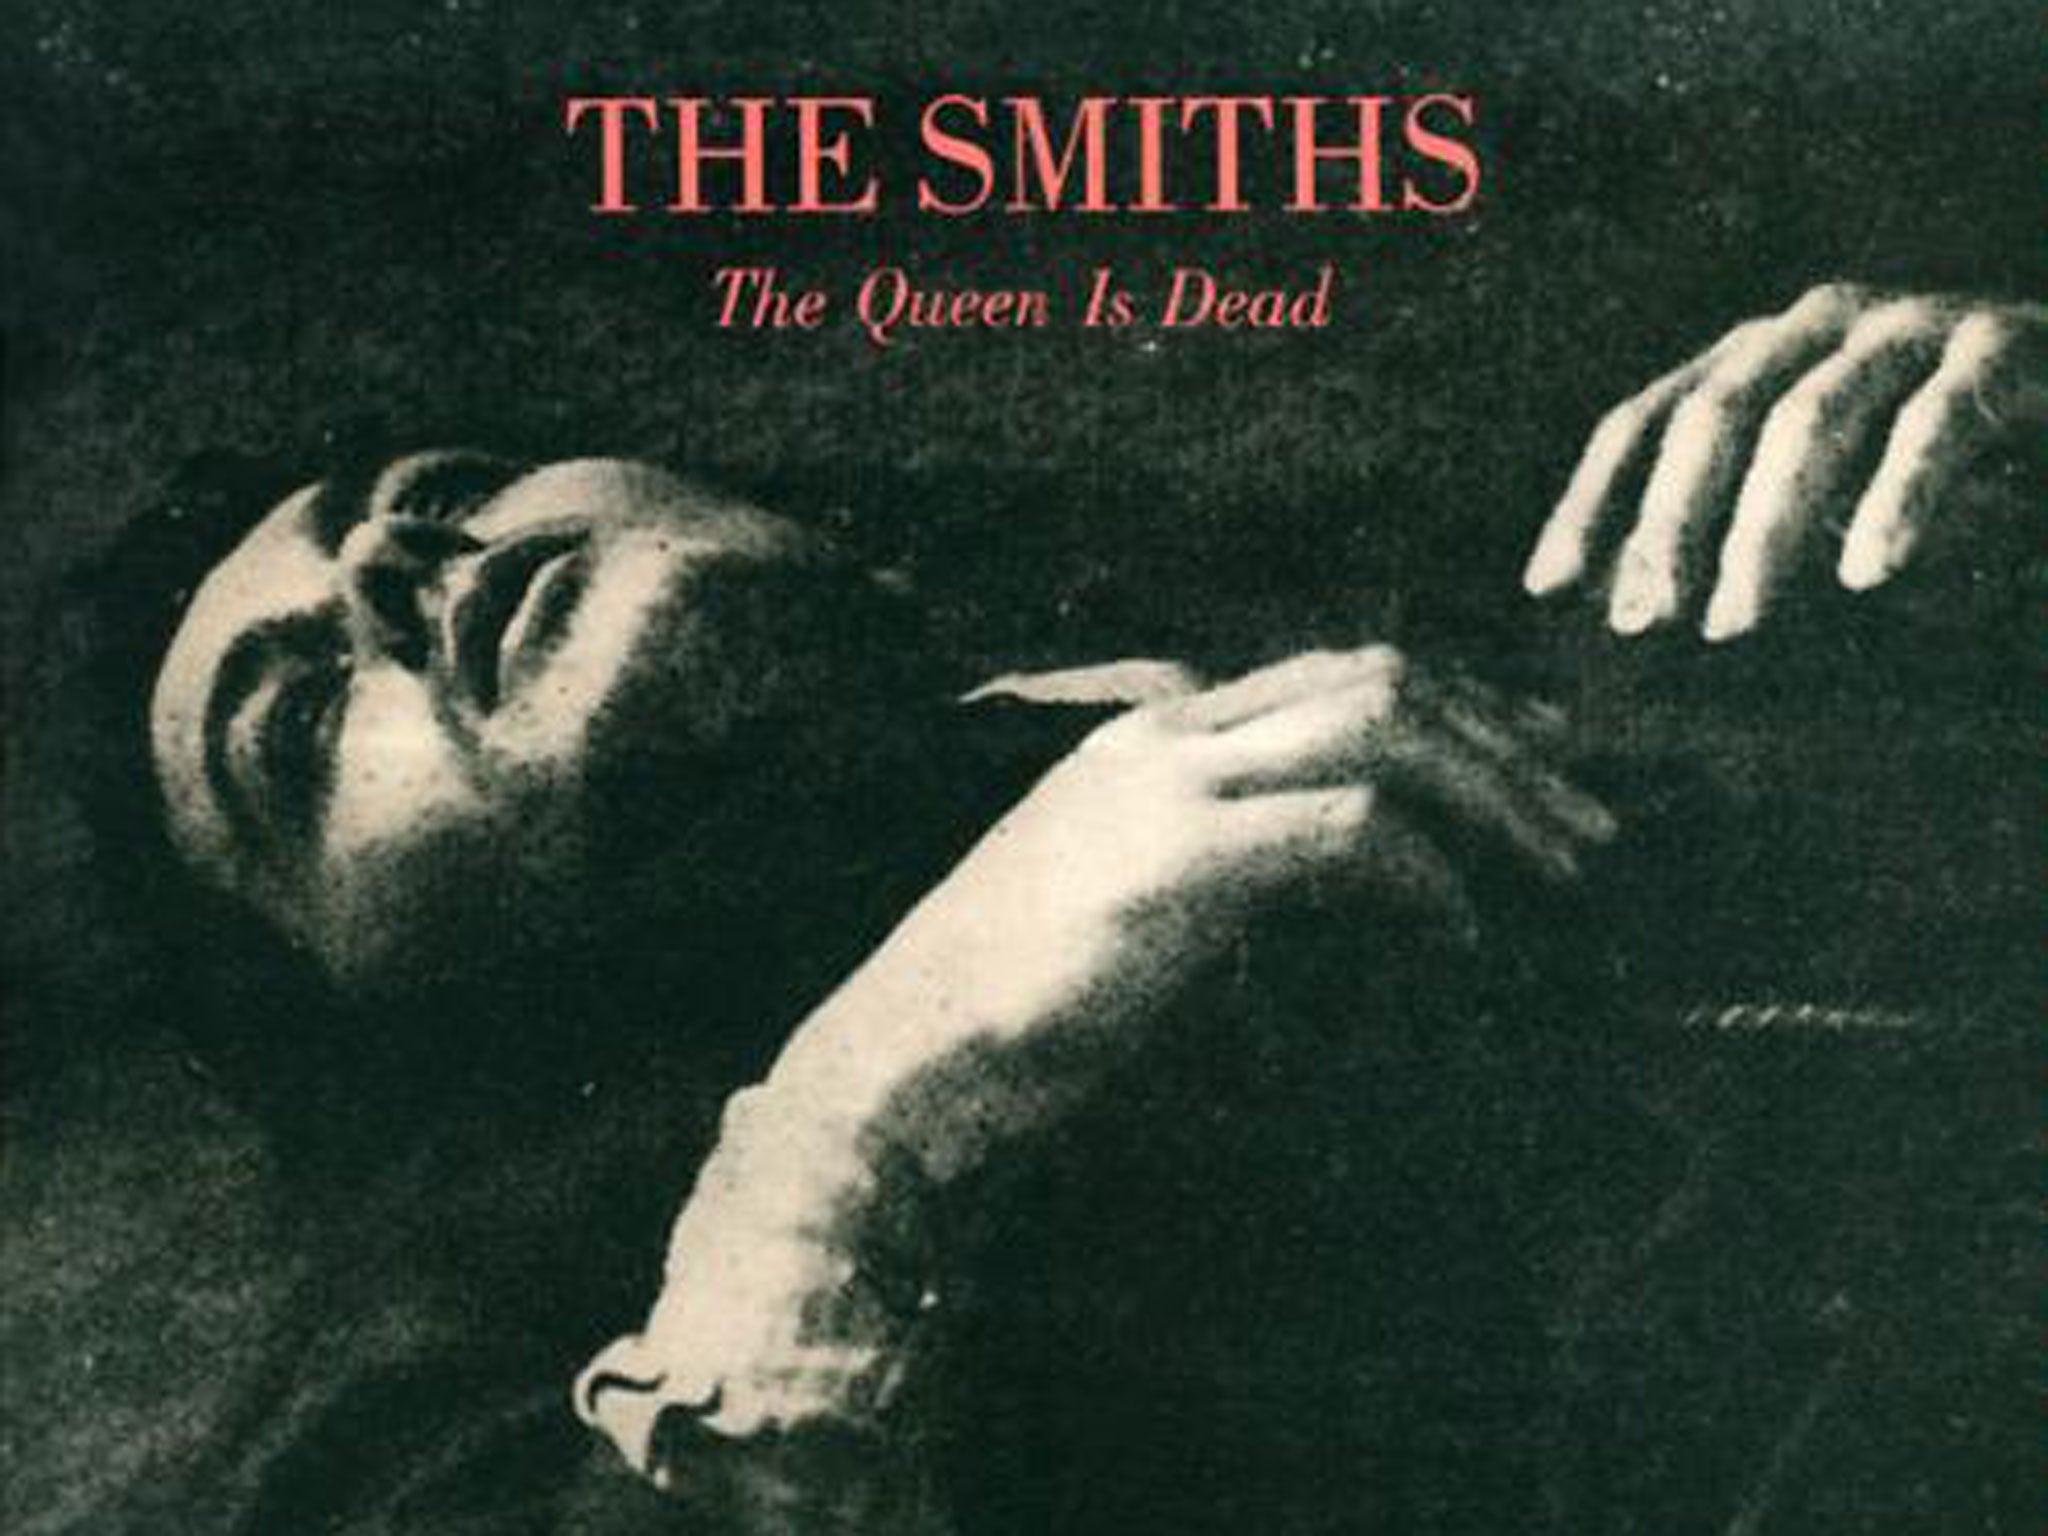 Nme Names The Smiths Album The Queen Is Dead As The Greatest Of All